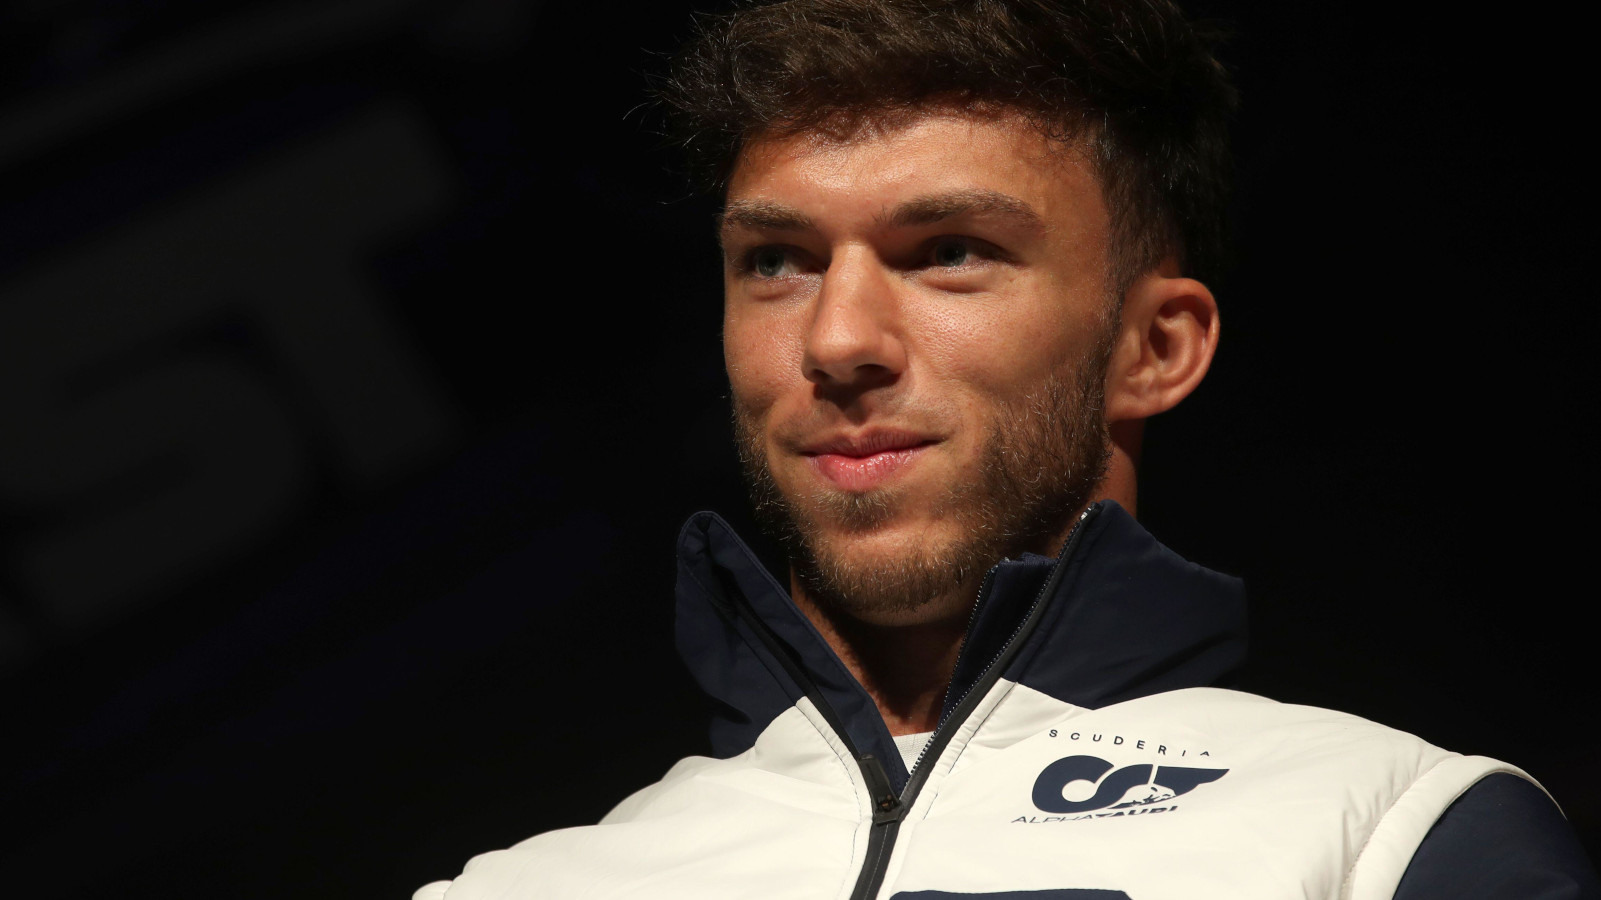 Pierre Gasly with a small grin. Australia April 2022